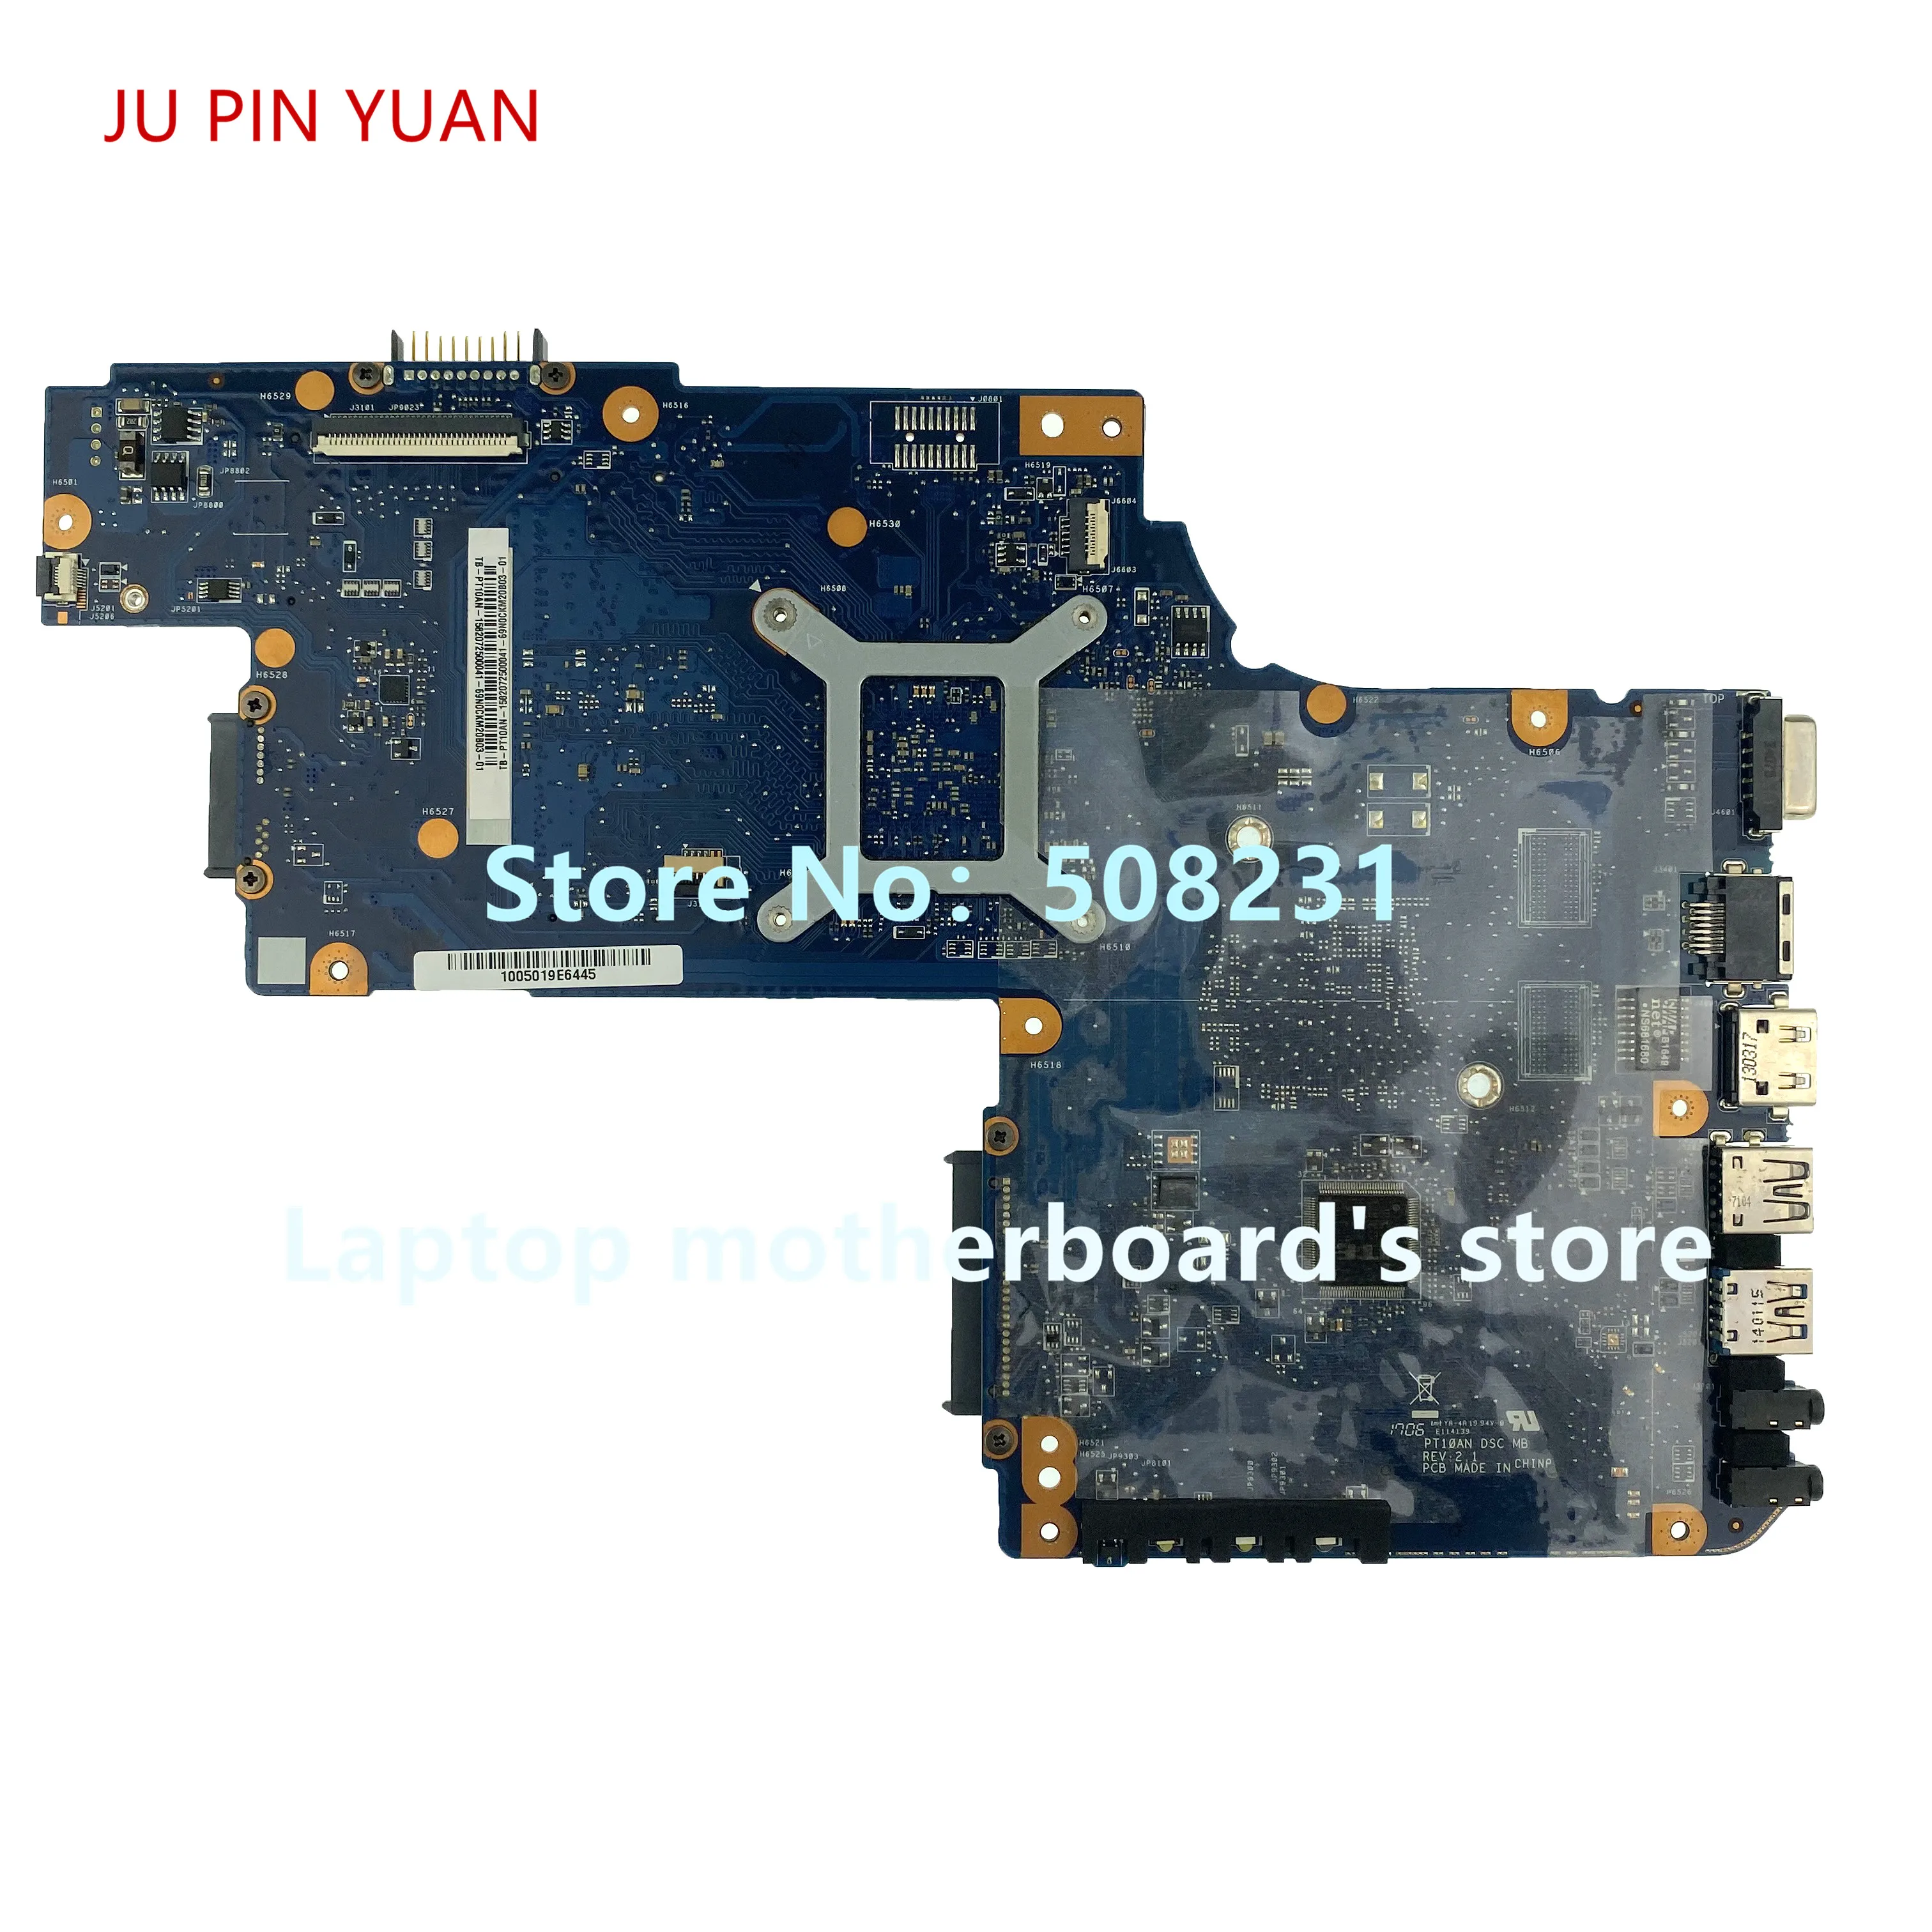 

JU PIN YUAN H000053400 Mainboard for Toshiba Satellite C50 C55 C50D C50-D C55D Laptop Motherboard 100% fully tested